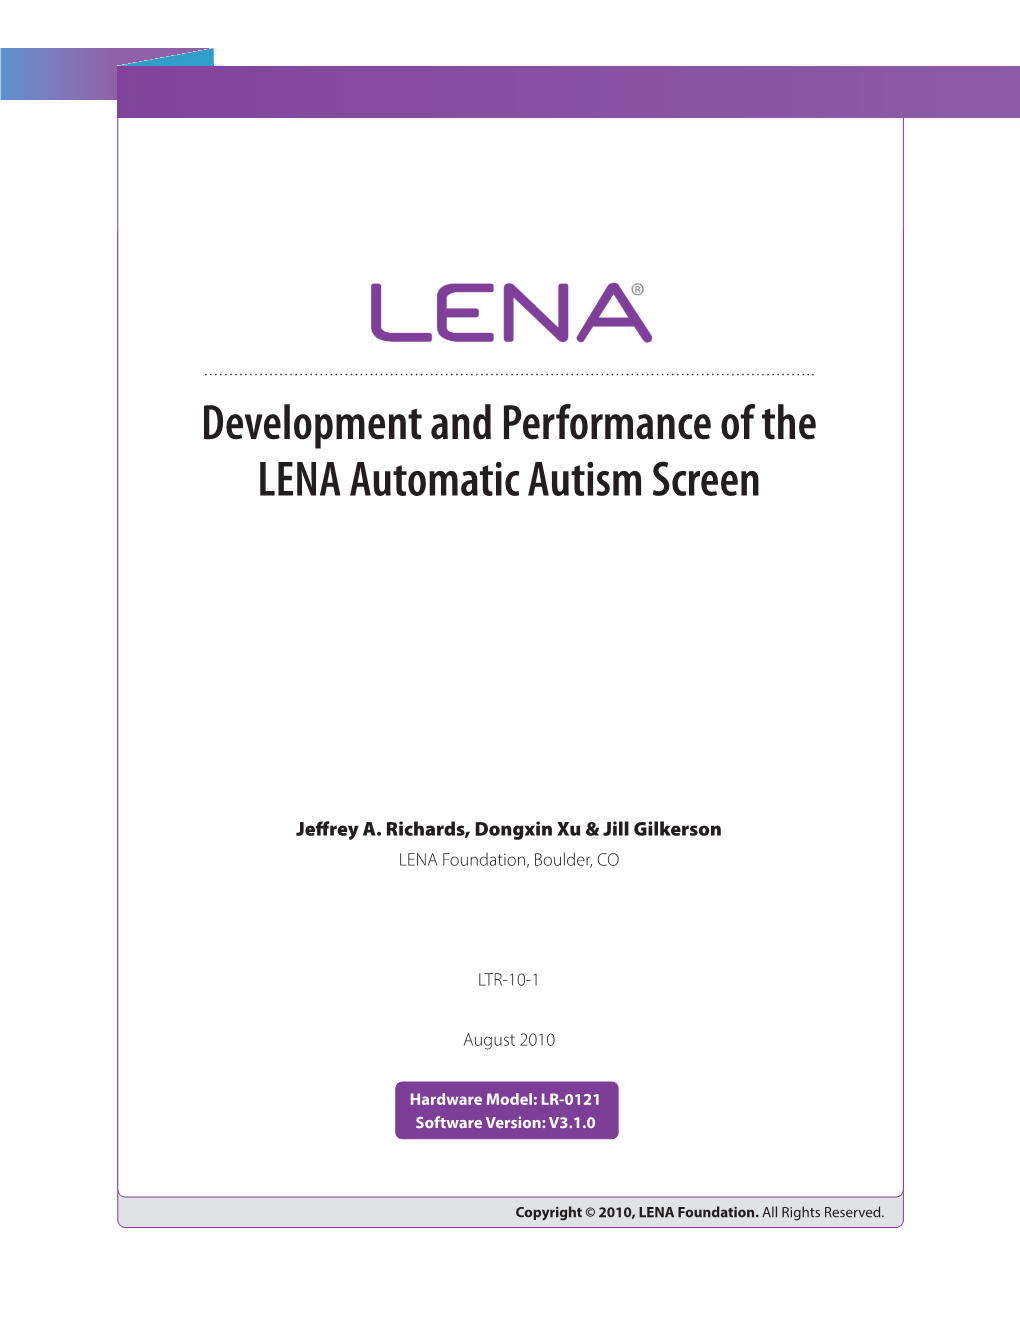 Development and Performance of the LENA Automatic Autism Screen